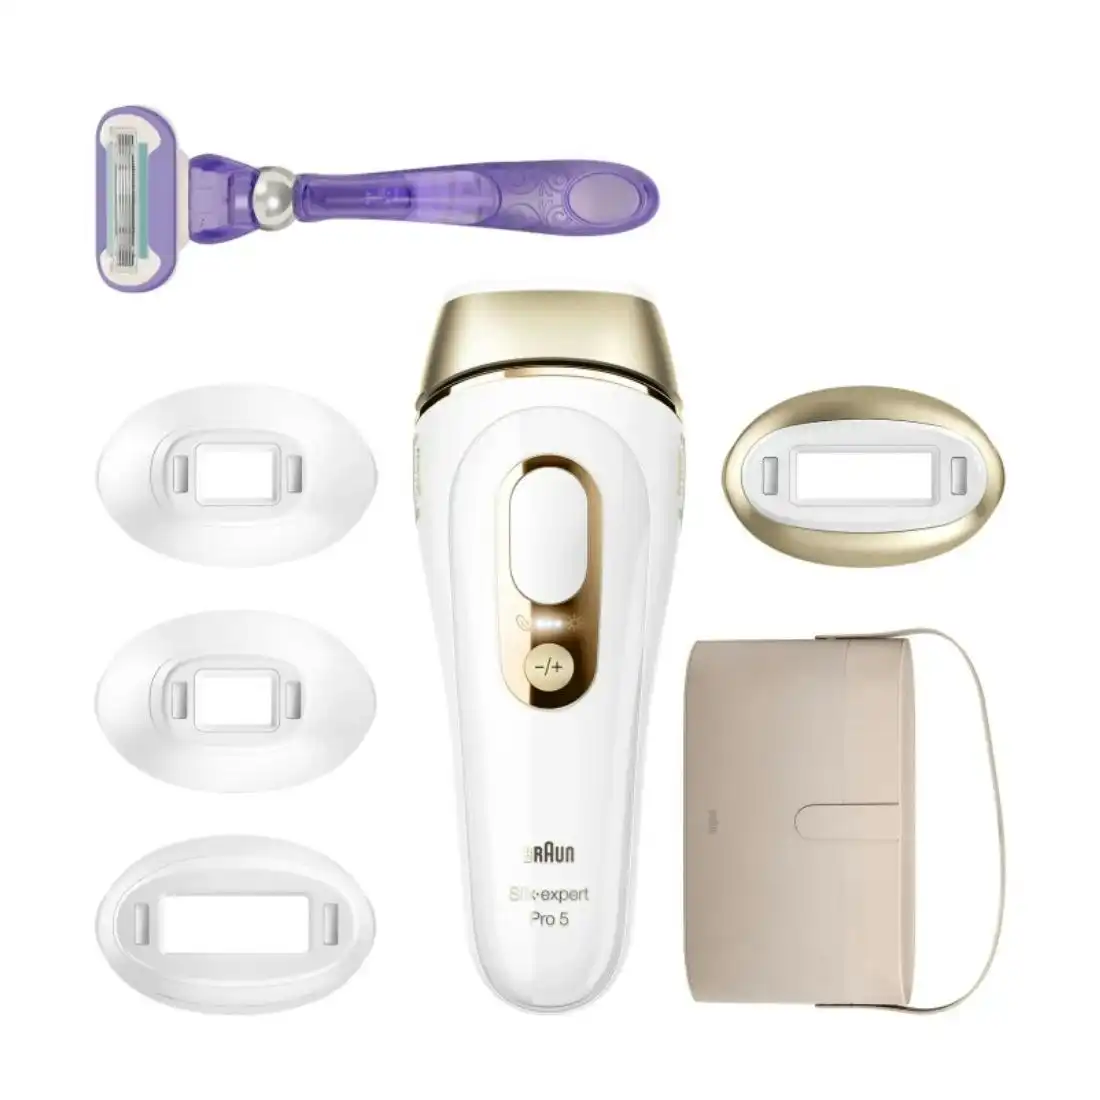 Braun Silk Expert Pro 5 IPL Long Term Permanent Hair Removal Device with 2 Precision Heads